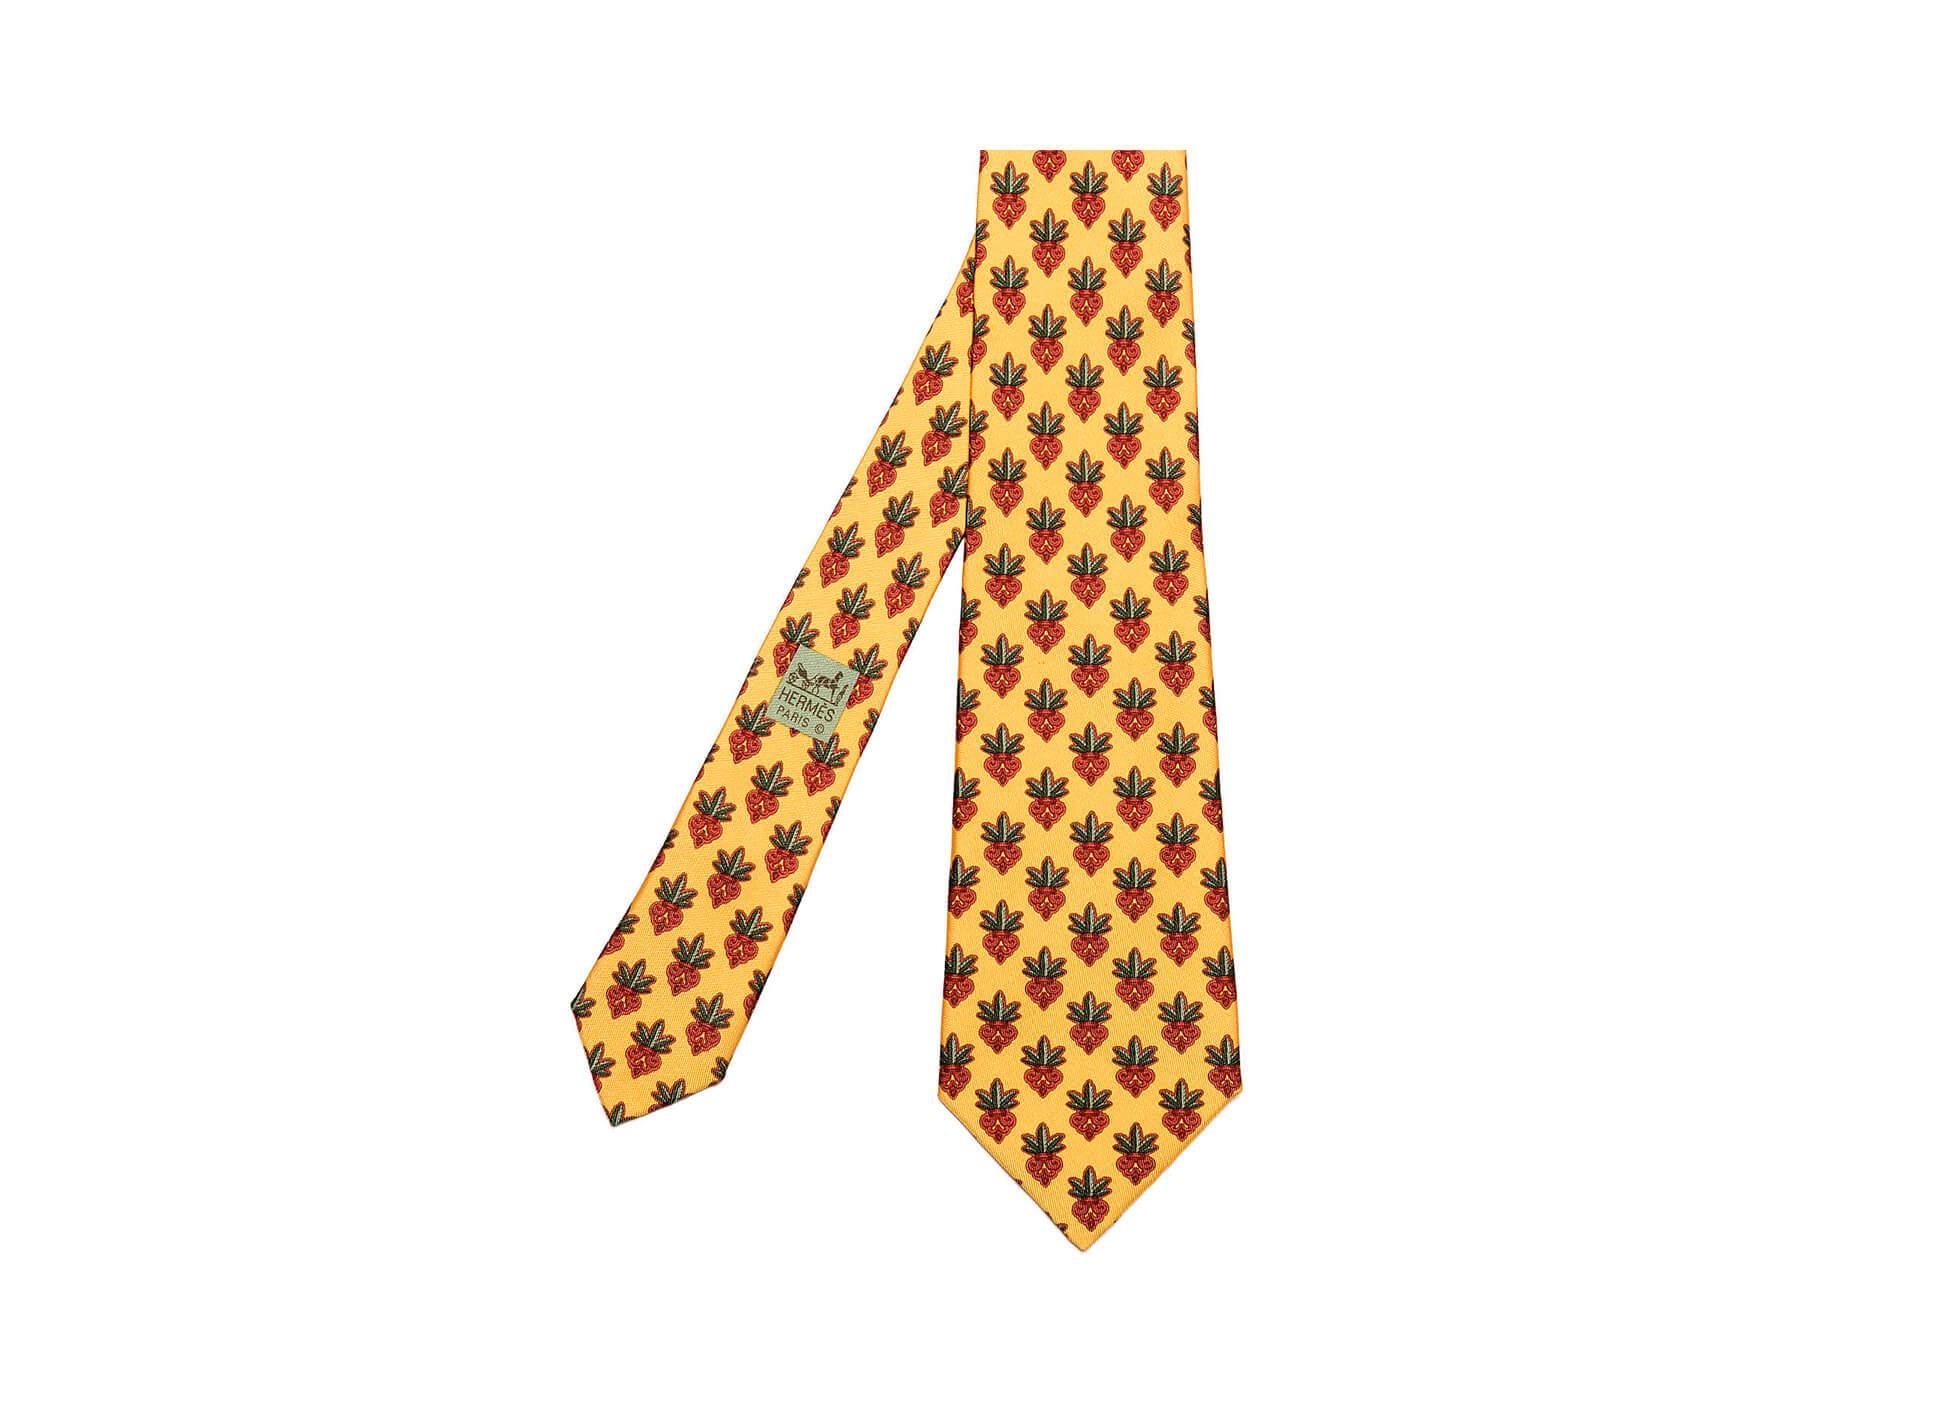 With scrolled decoration on a yellow ground, this superb Hermes vintage silk tie is in pristine condition.